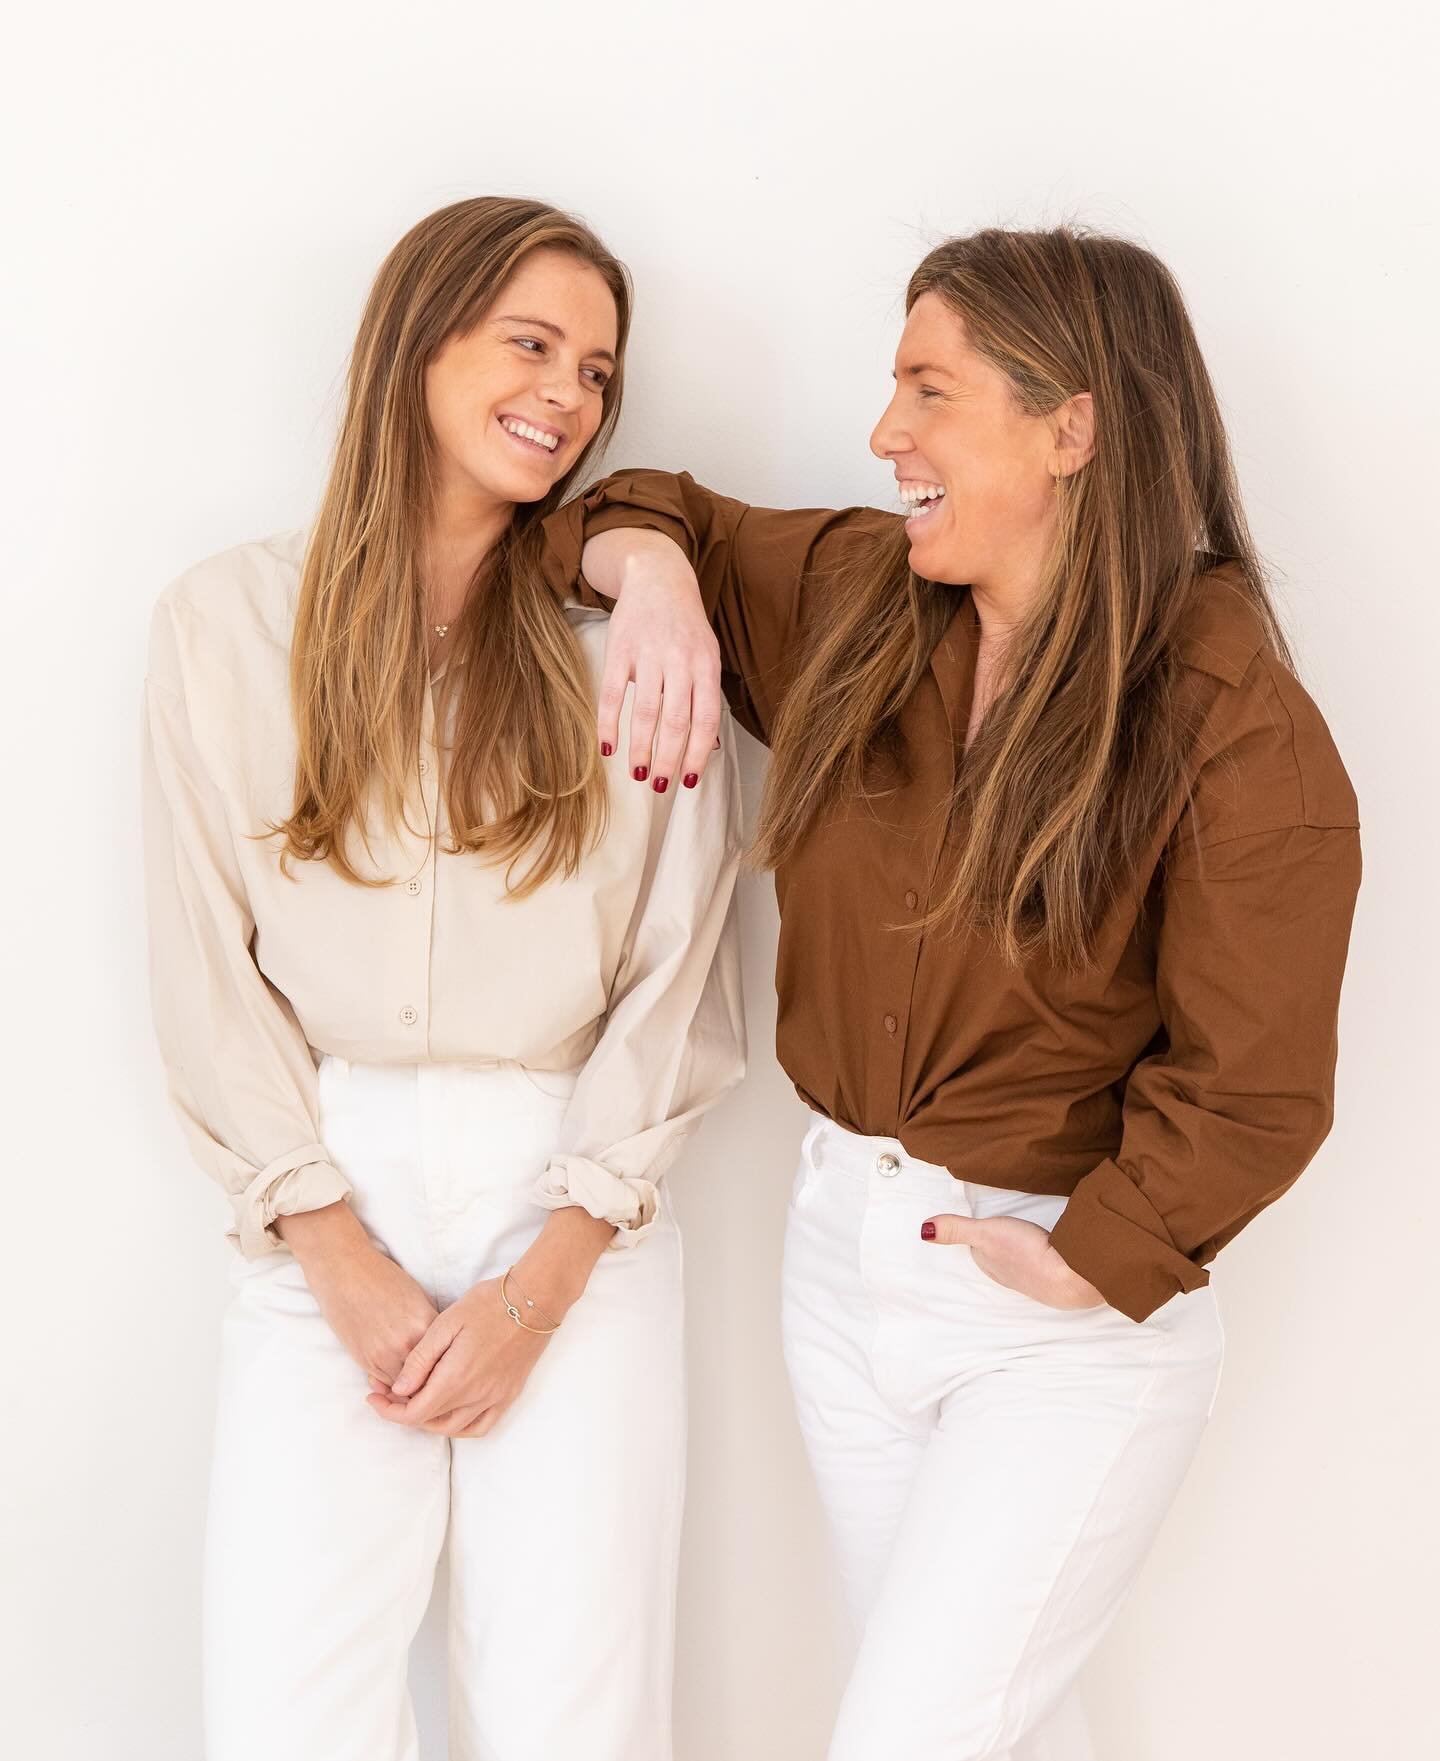 Friends and business partners, Carlotta Casals &amp; Georgie Cavanagh, are founders of @carlottaandgee &mdash;they share their work journey, love of locally made quality linen bedding, new and exciting pieces in the pipeline, and much more!

See more